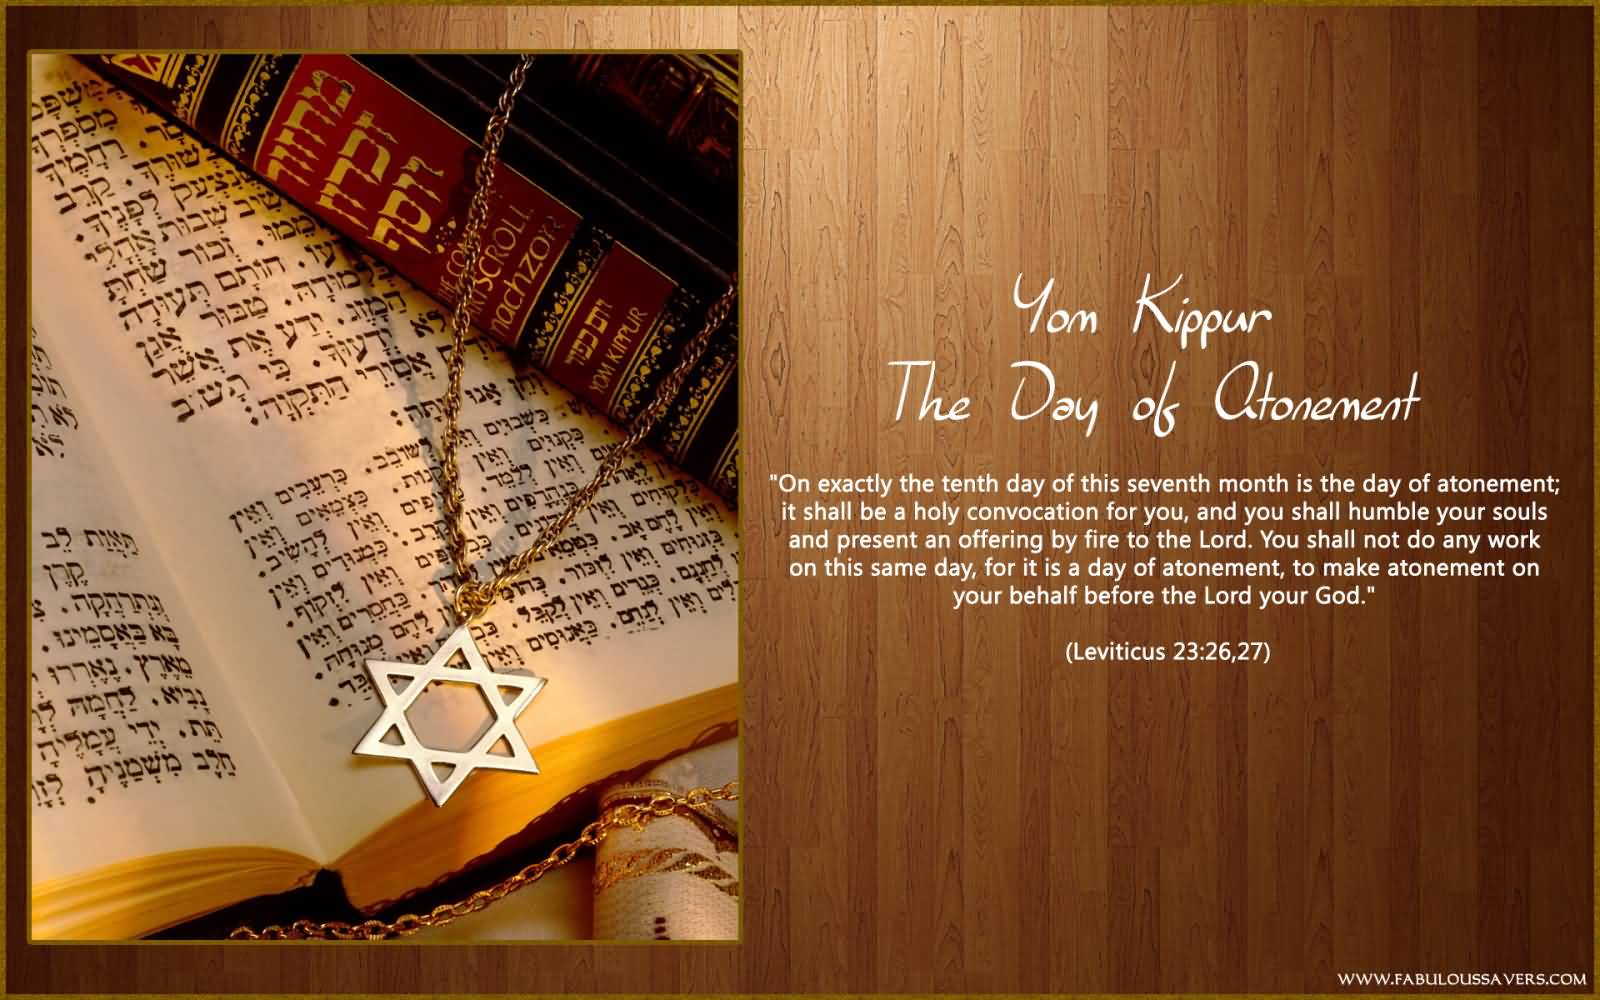 Yom Kippur The Day of Atonement Greeting Picture